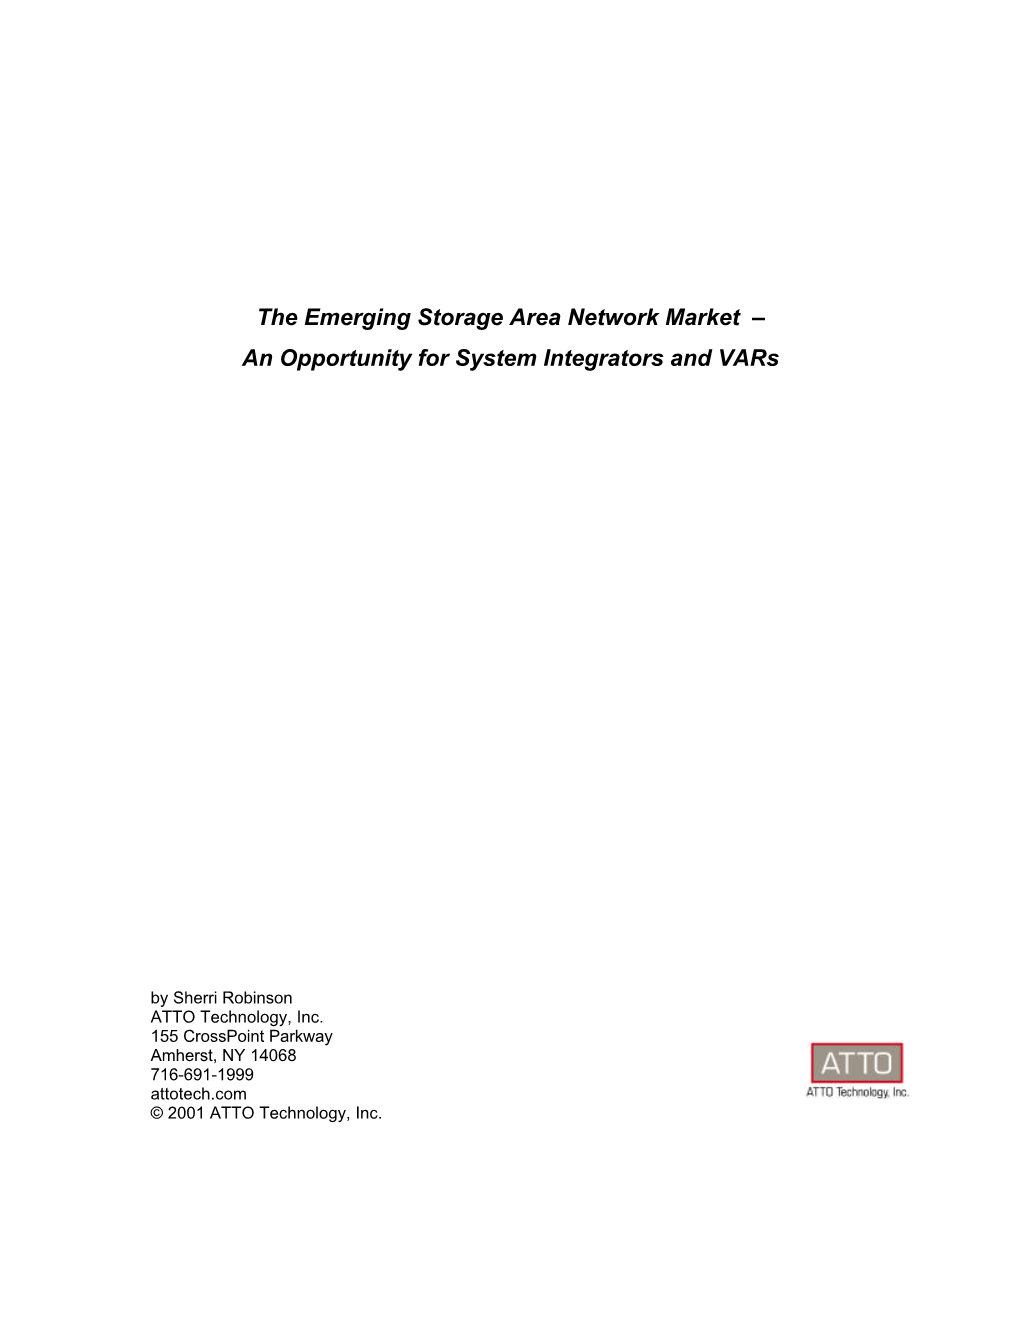 The Emerging Storage Area Network Market – an Opportunity for System Integrators and Vars